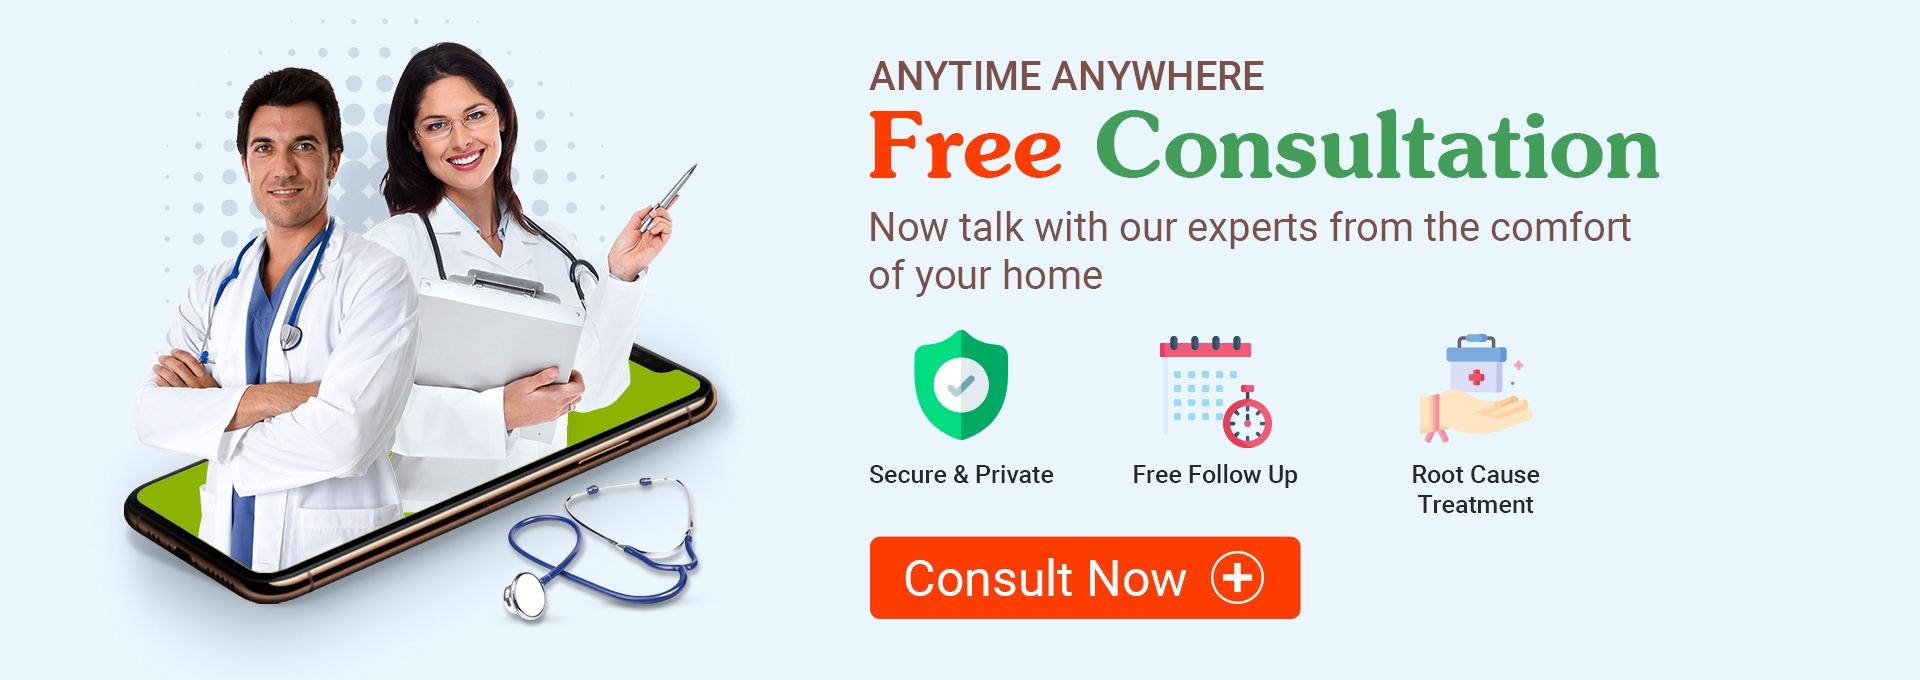 Free consultation by world's best doctors